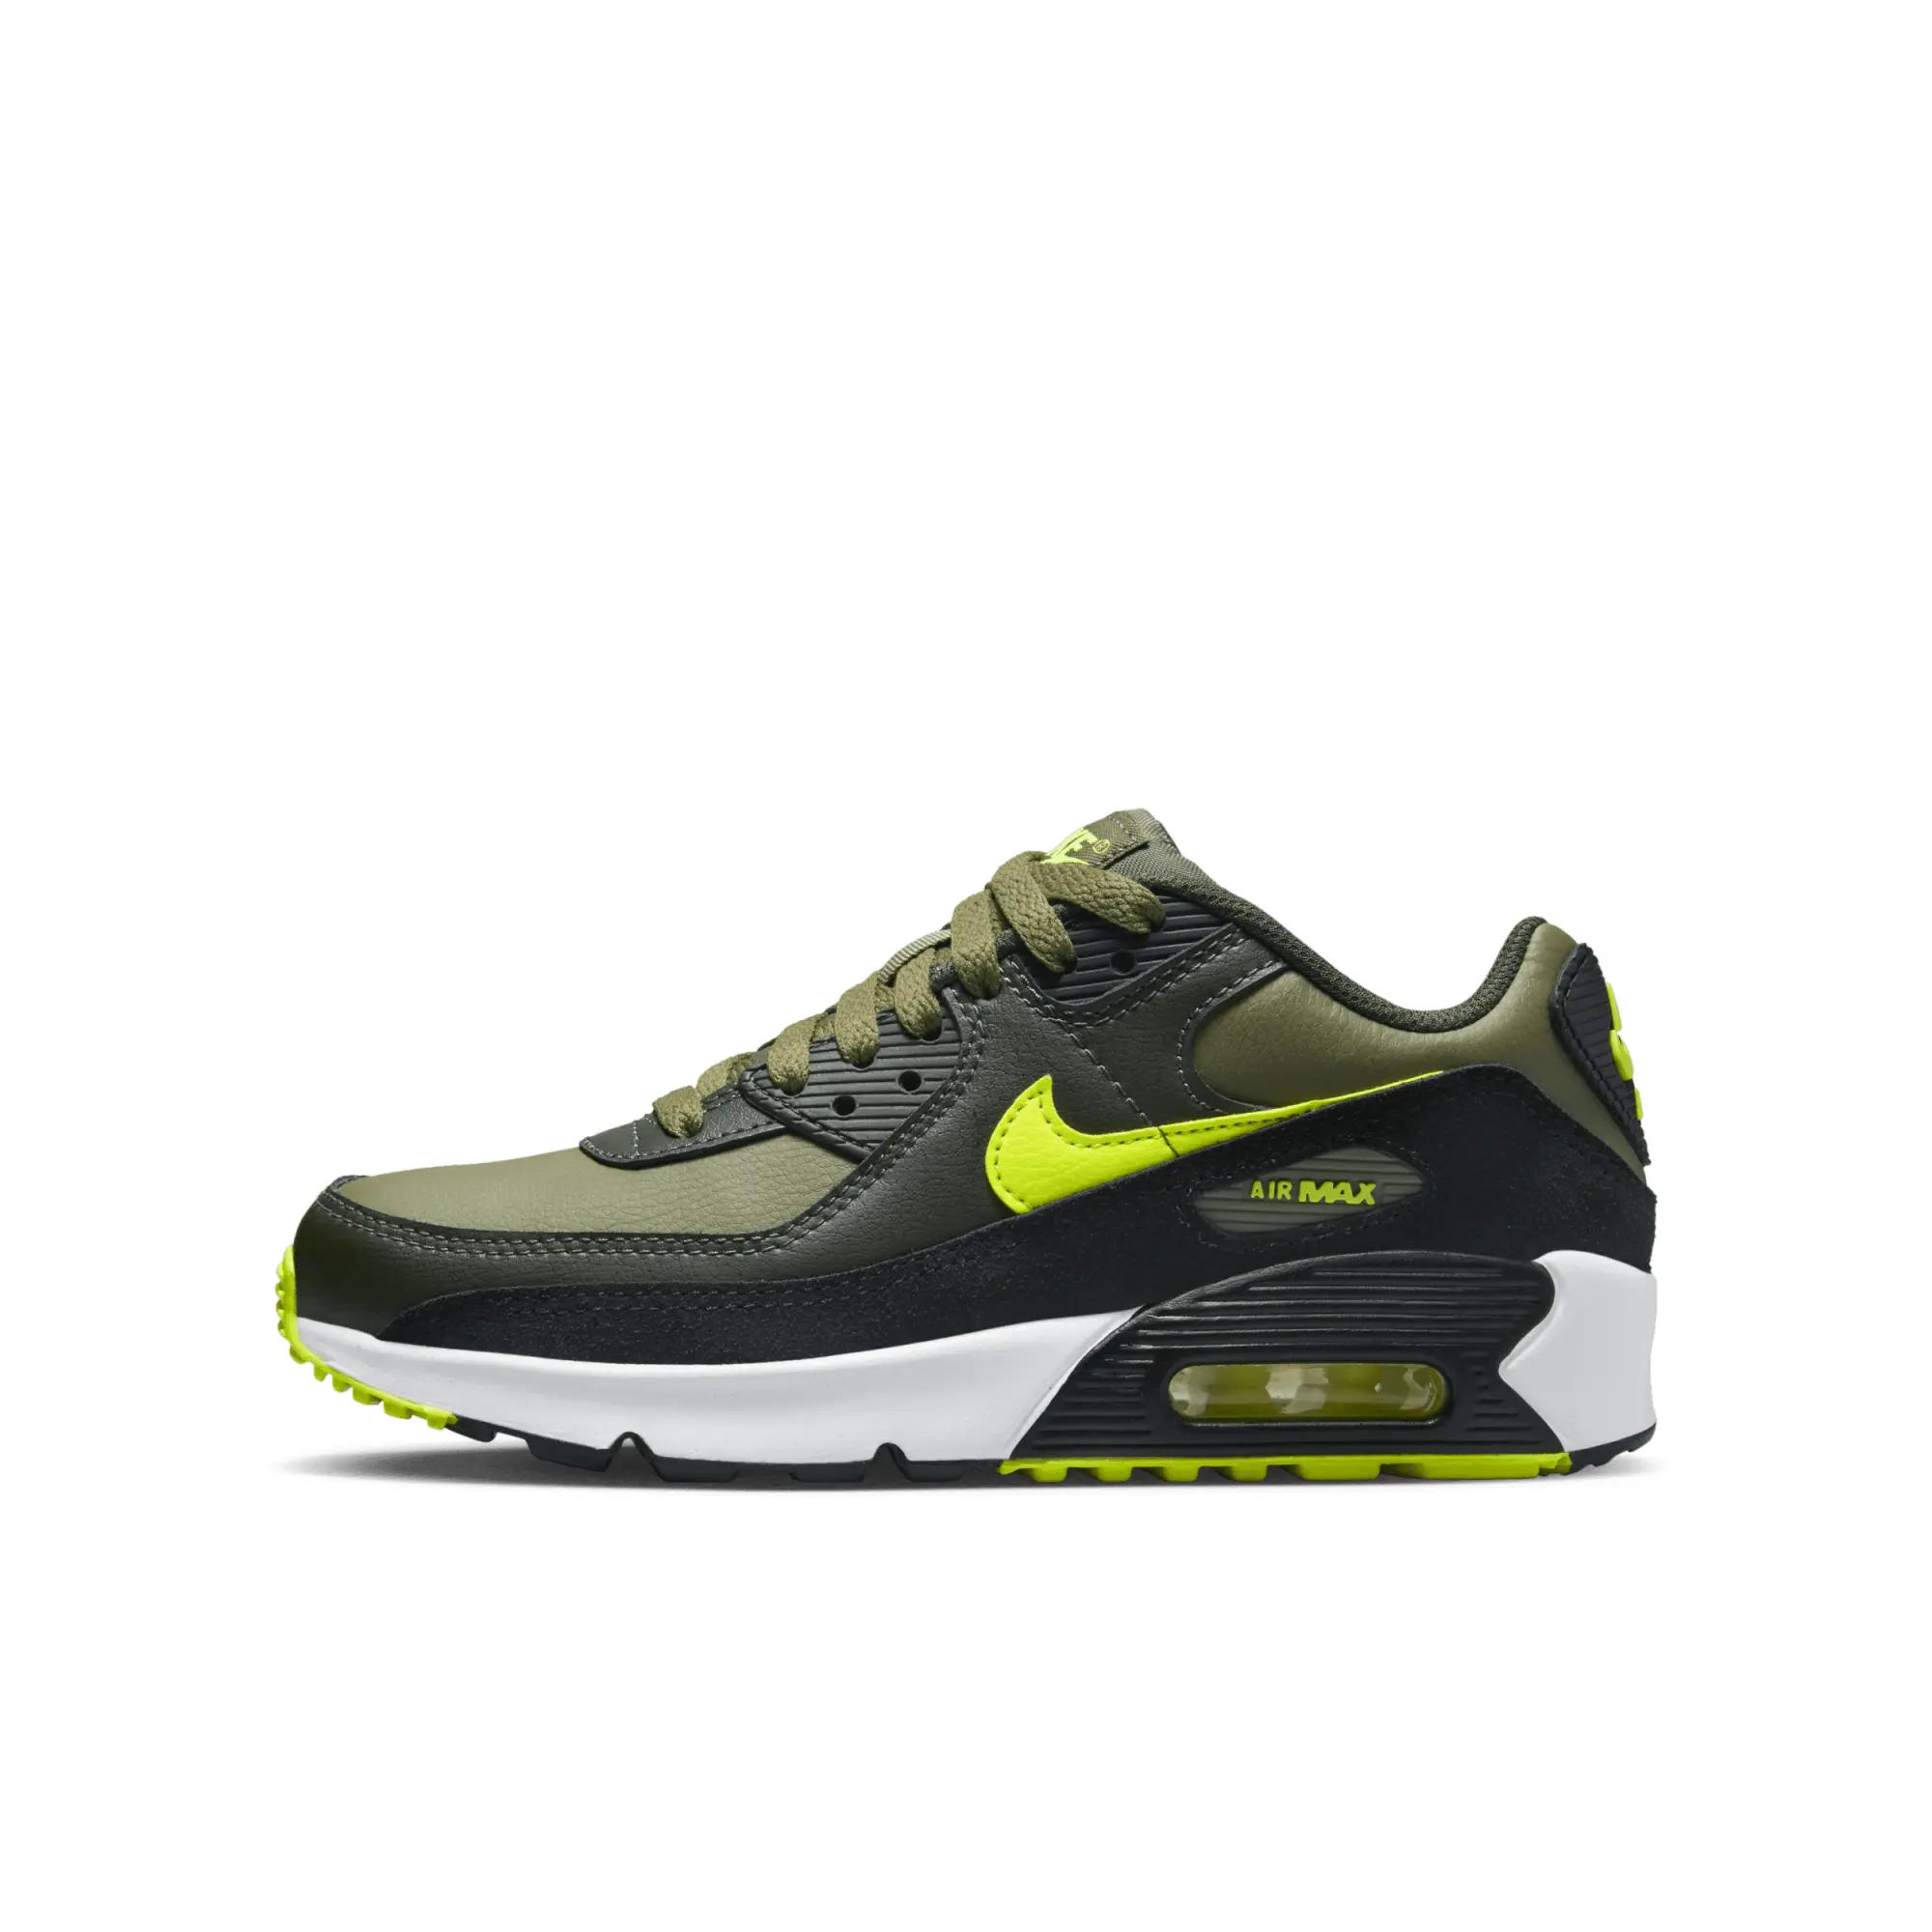 Nike Dark Grey Air Max 90 Ltr Youth Trainers